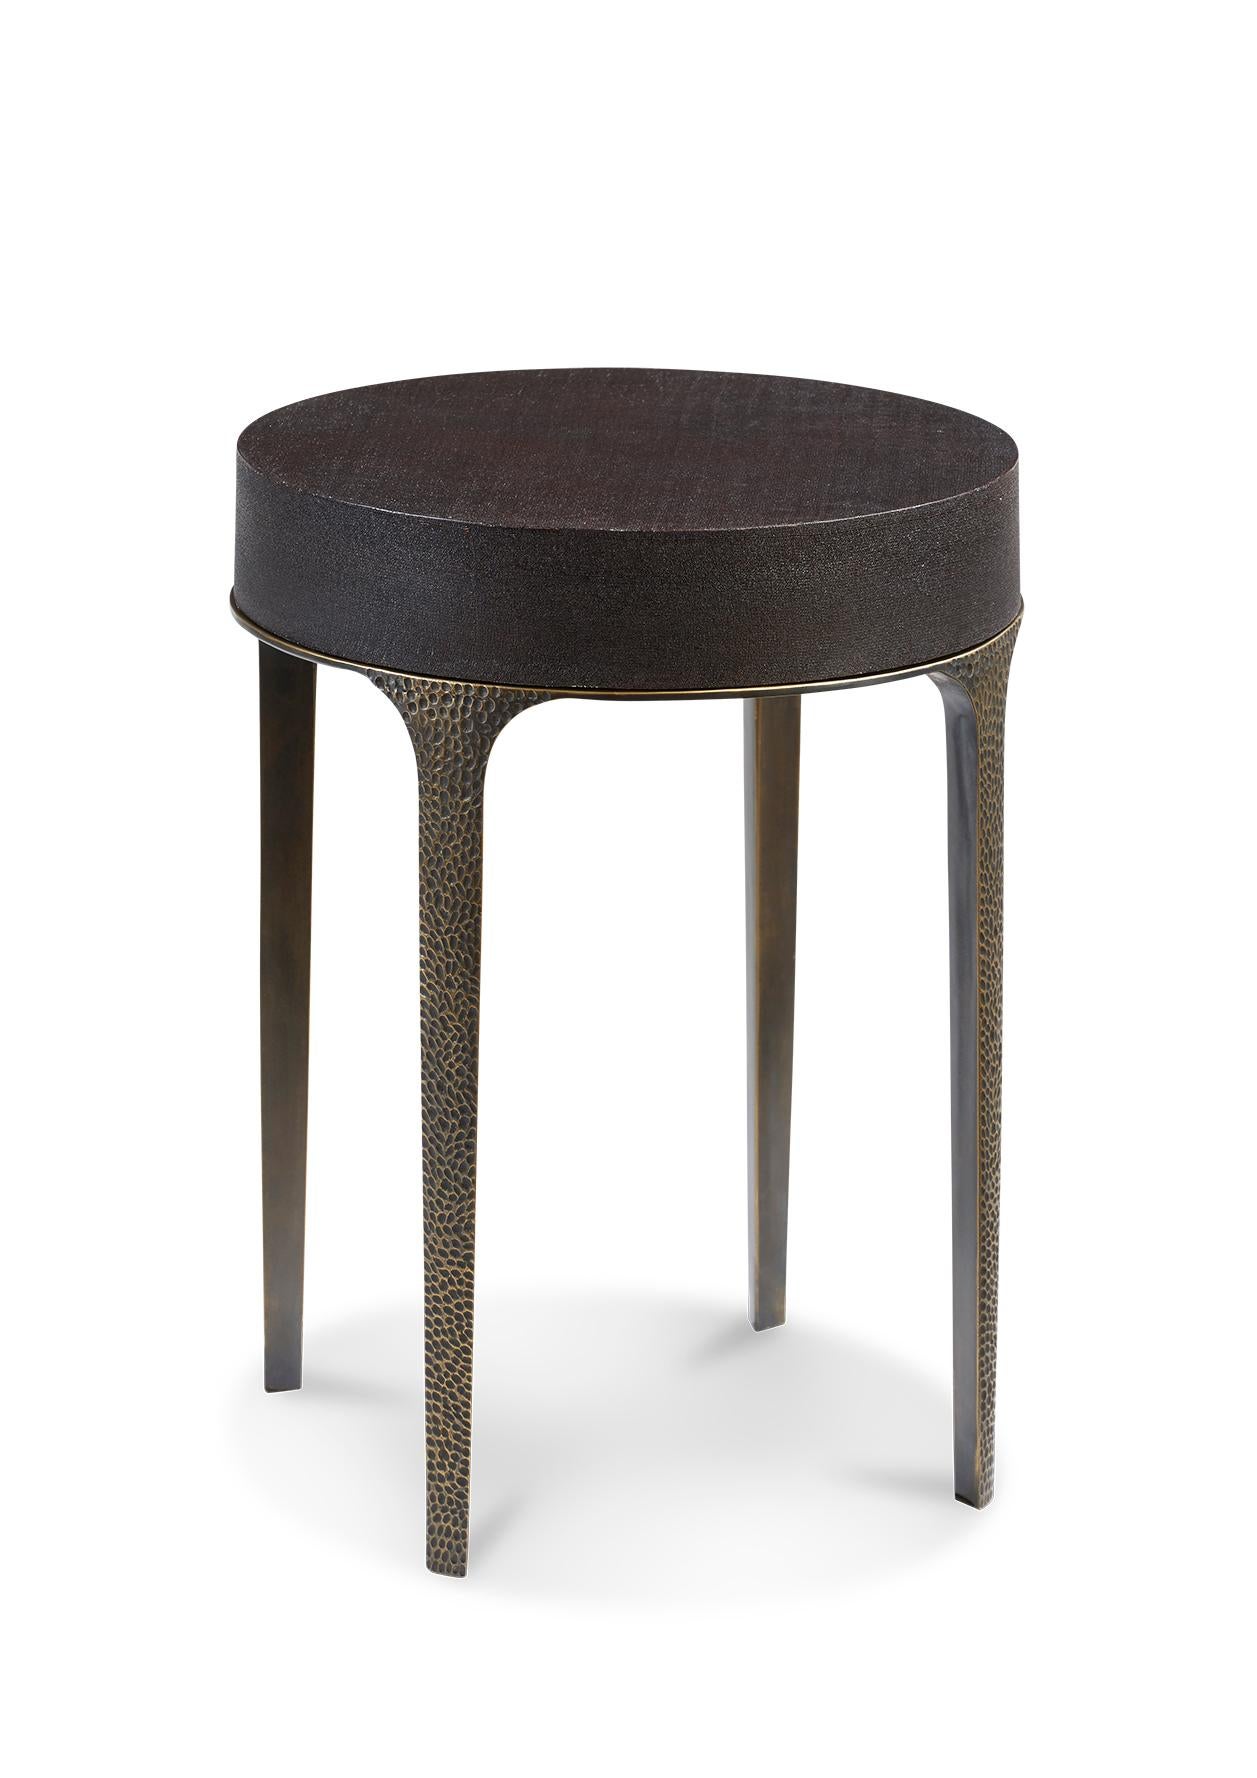 Reda Amalou designed a side table combining simplicity and modernity: the Lady Bug. The nobility of its materials and minimal lines give this side table natural elegance. Its legs in hammered bronze and the lacquered fabric top give it all its